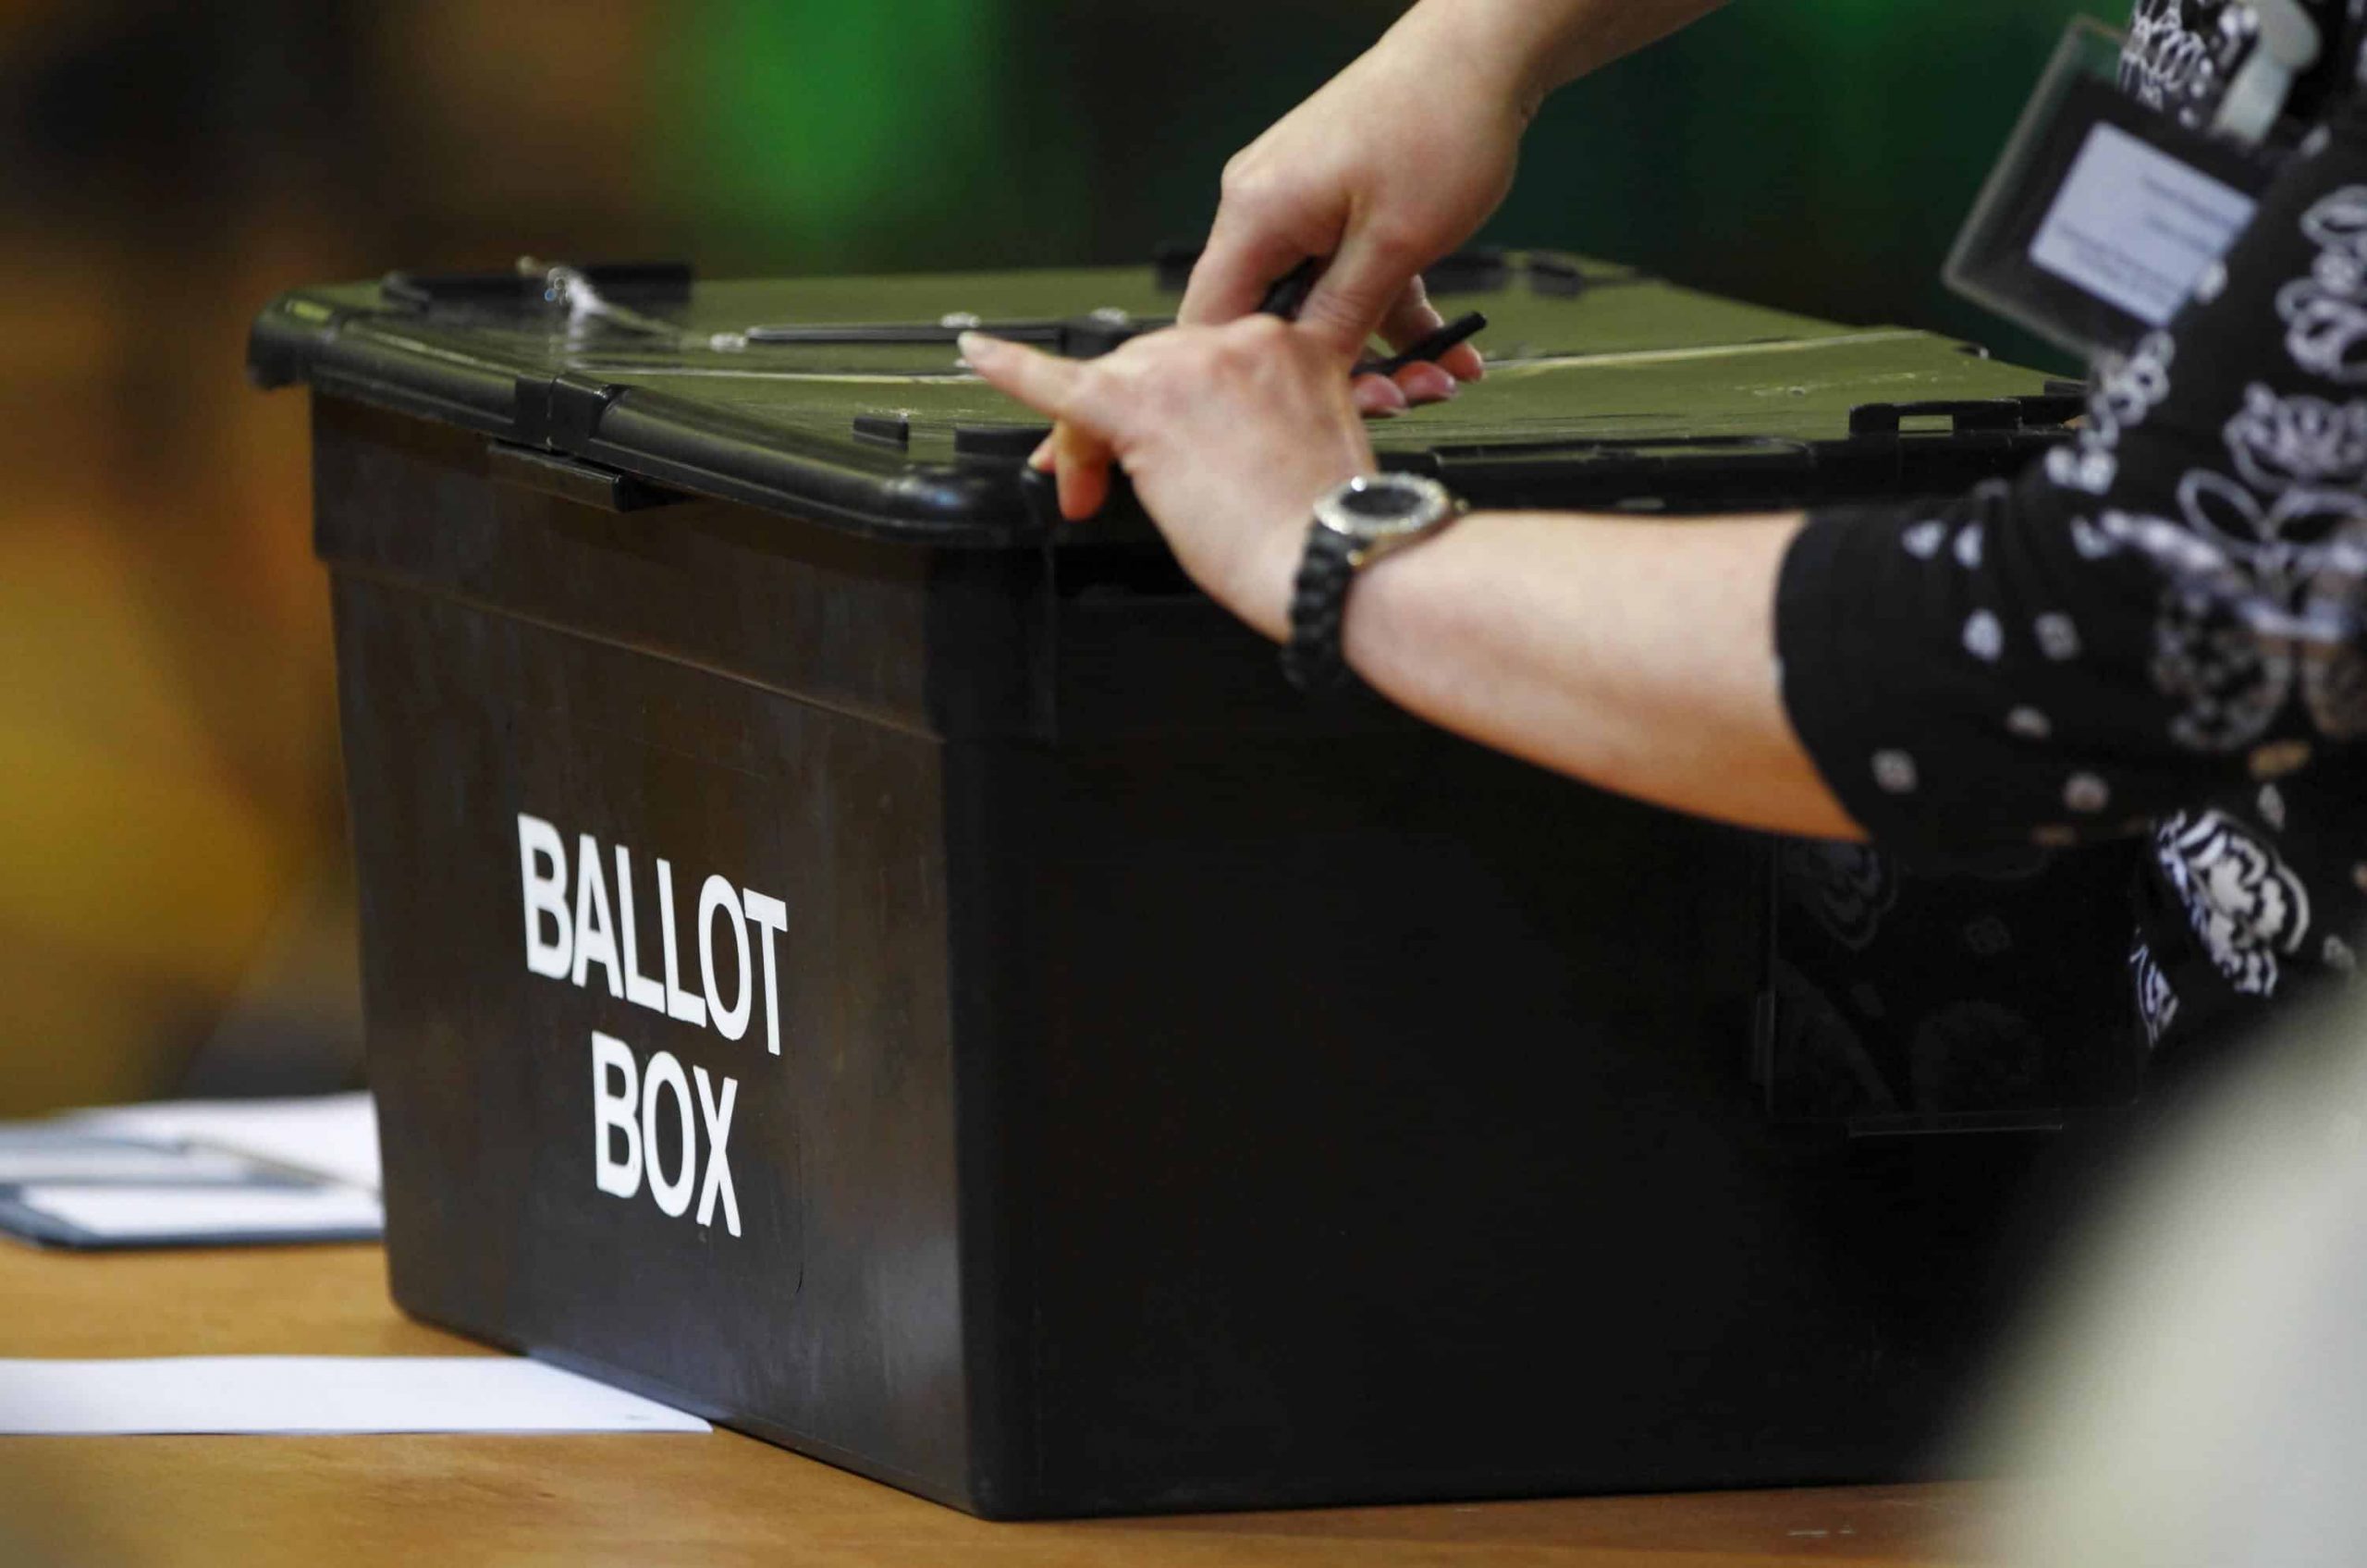 Two million apply to register to vote since General Election announced